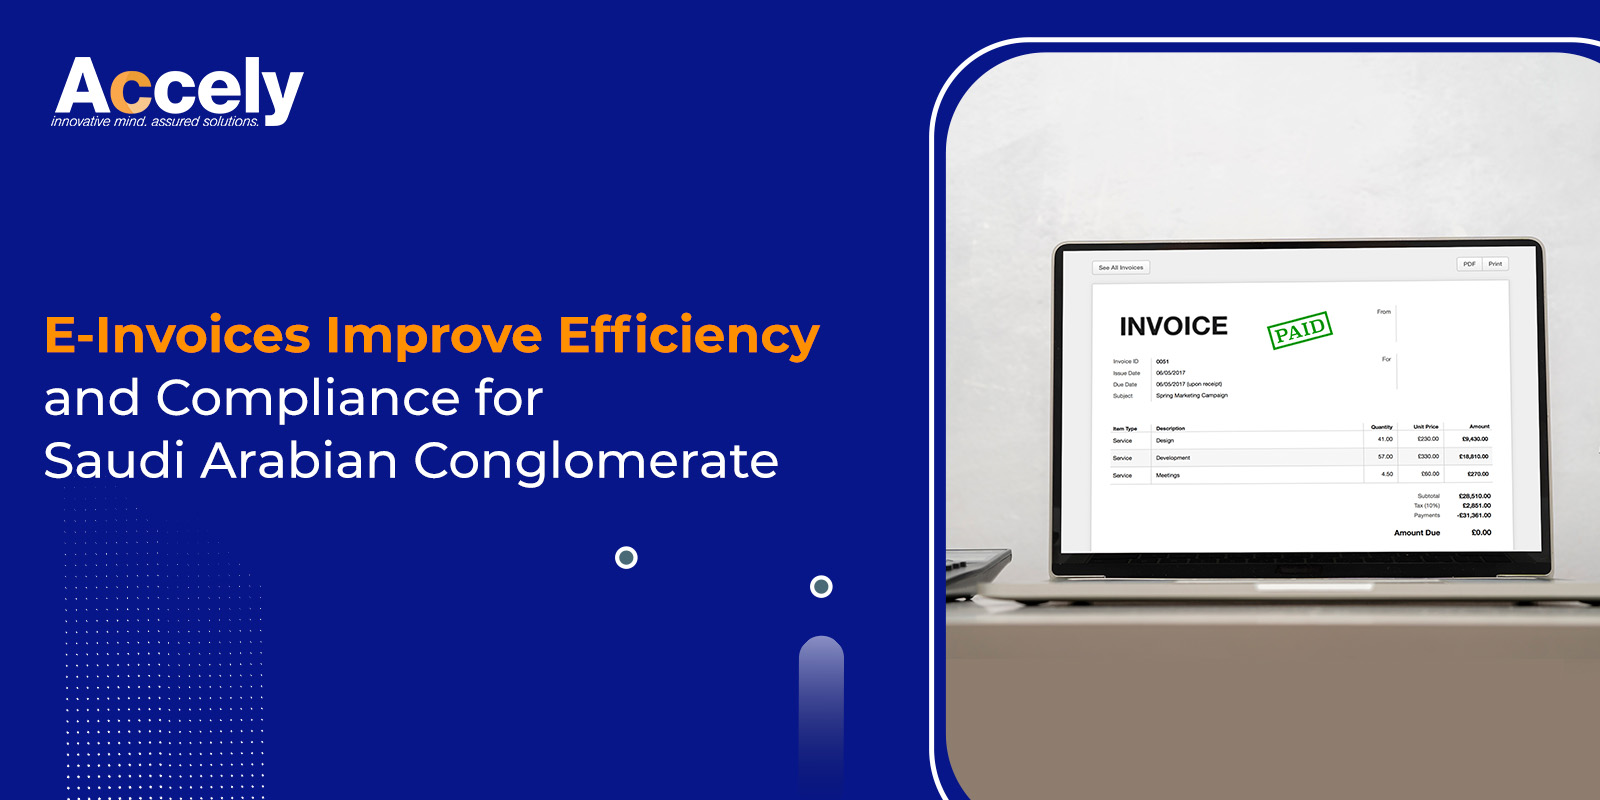 E-Invoices Improve Efficiency and Compliance for Saudi Arabian Conglomerate